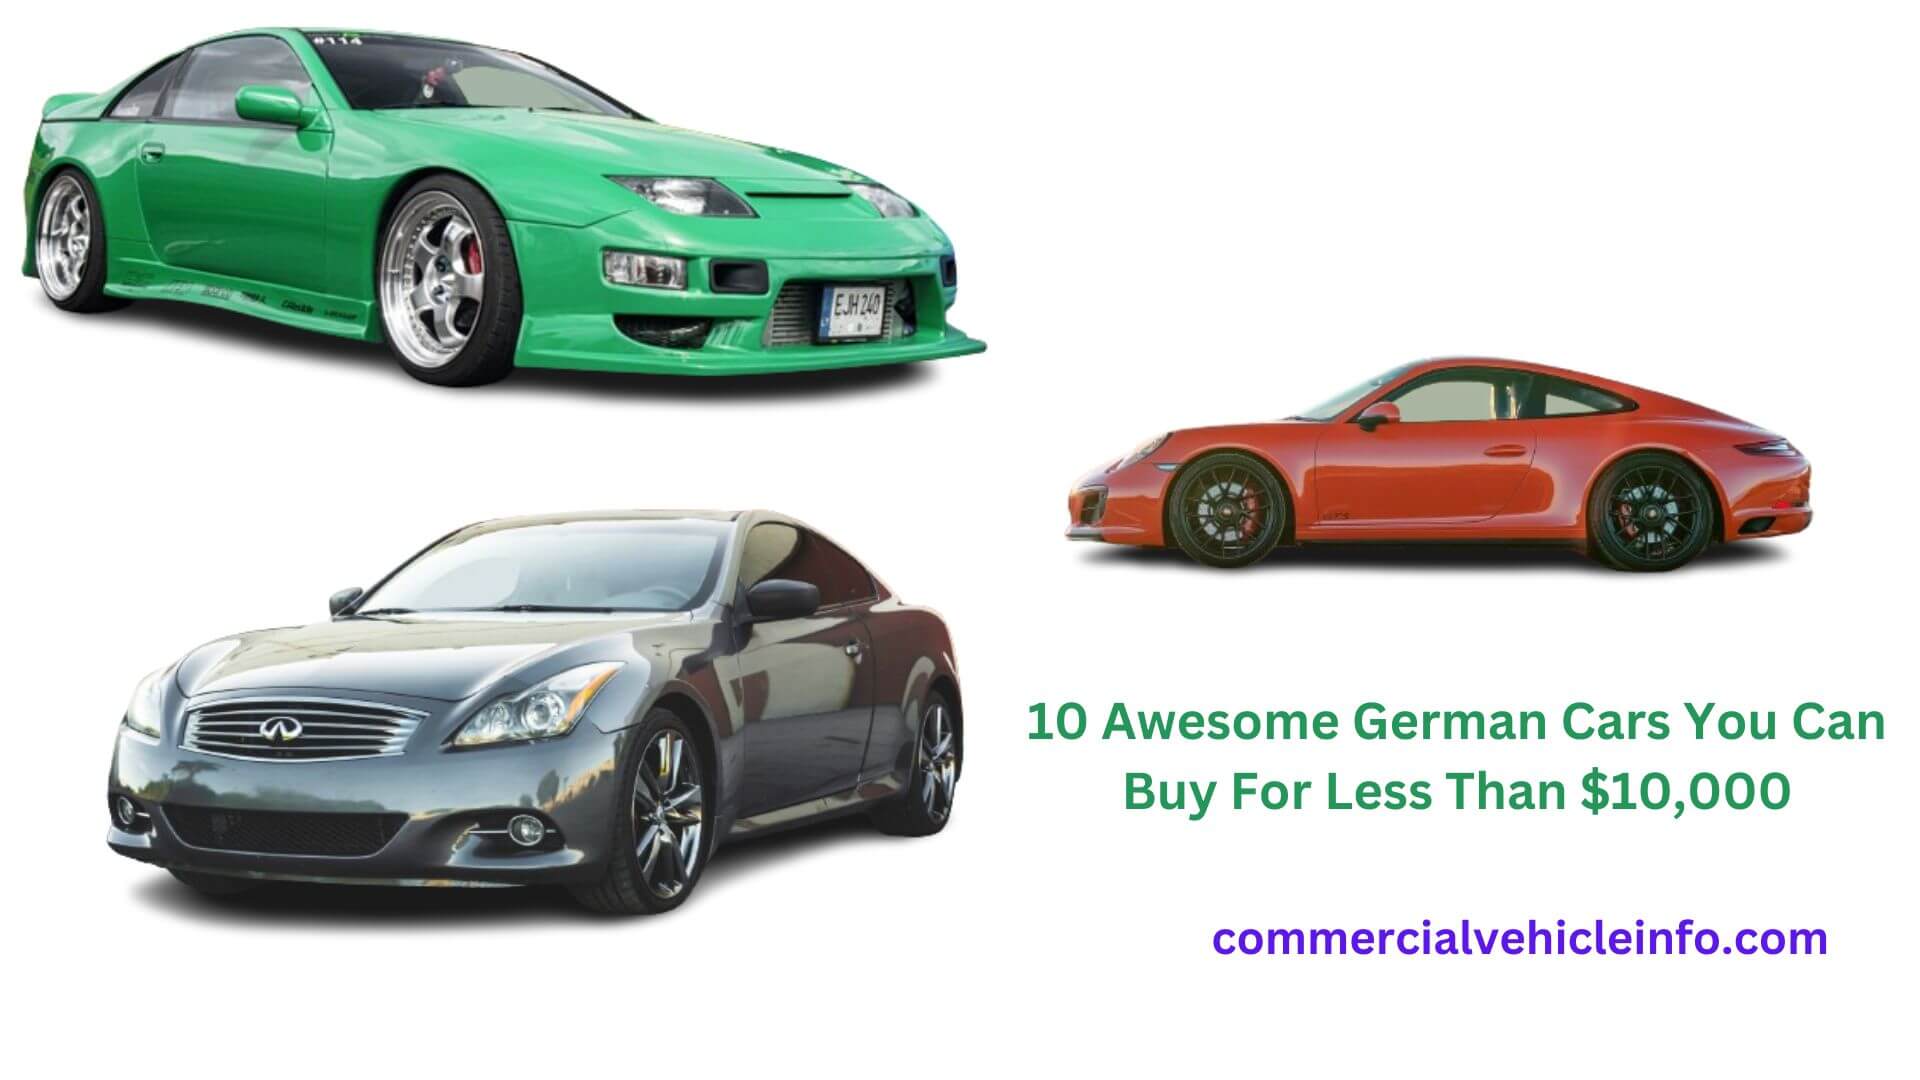 10-Awesome-German-Cars-You-Can-Buy-For-Less-Than-10000